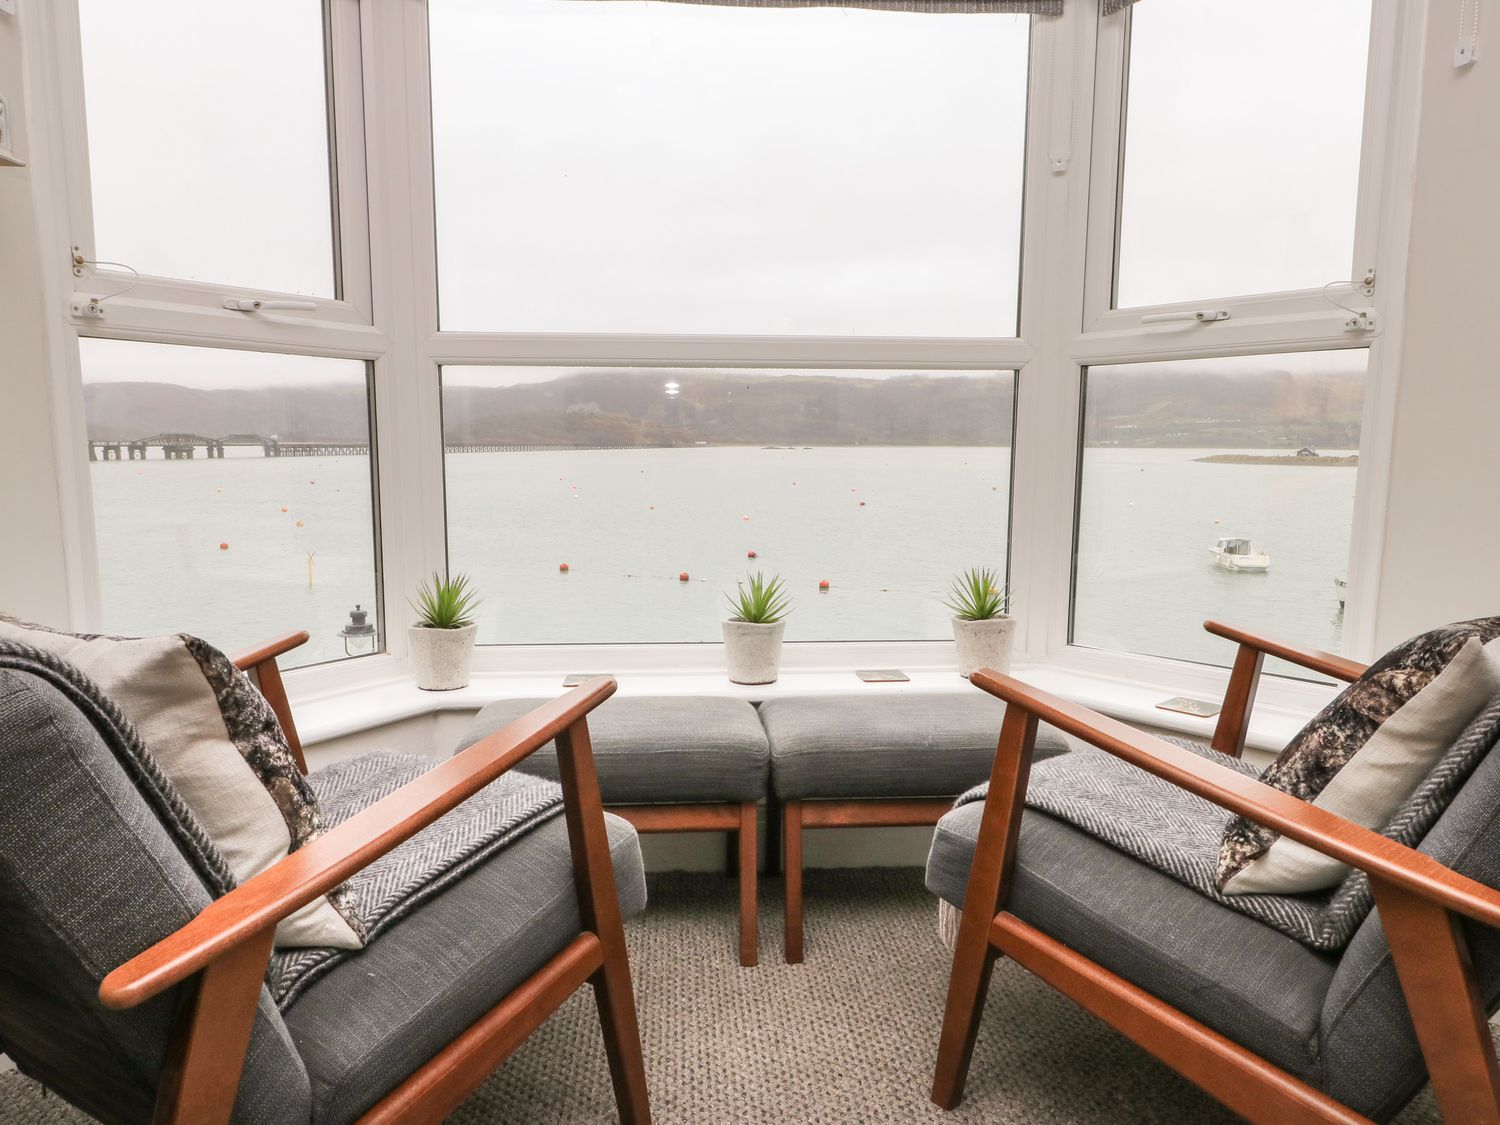 Harbour View - Flat 2 - North Wales - 1103635 - photo 1